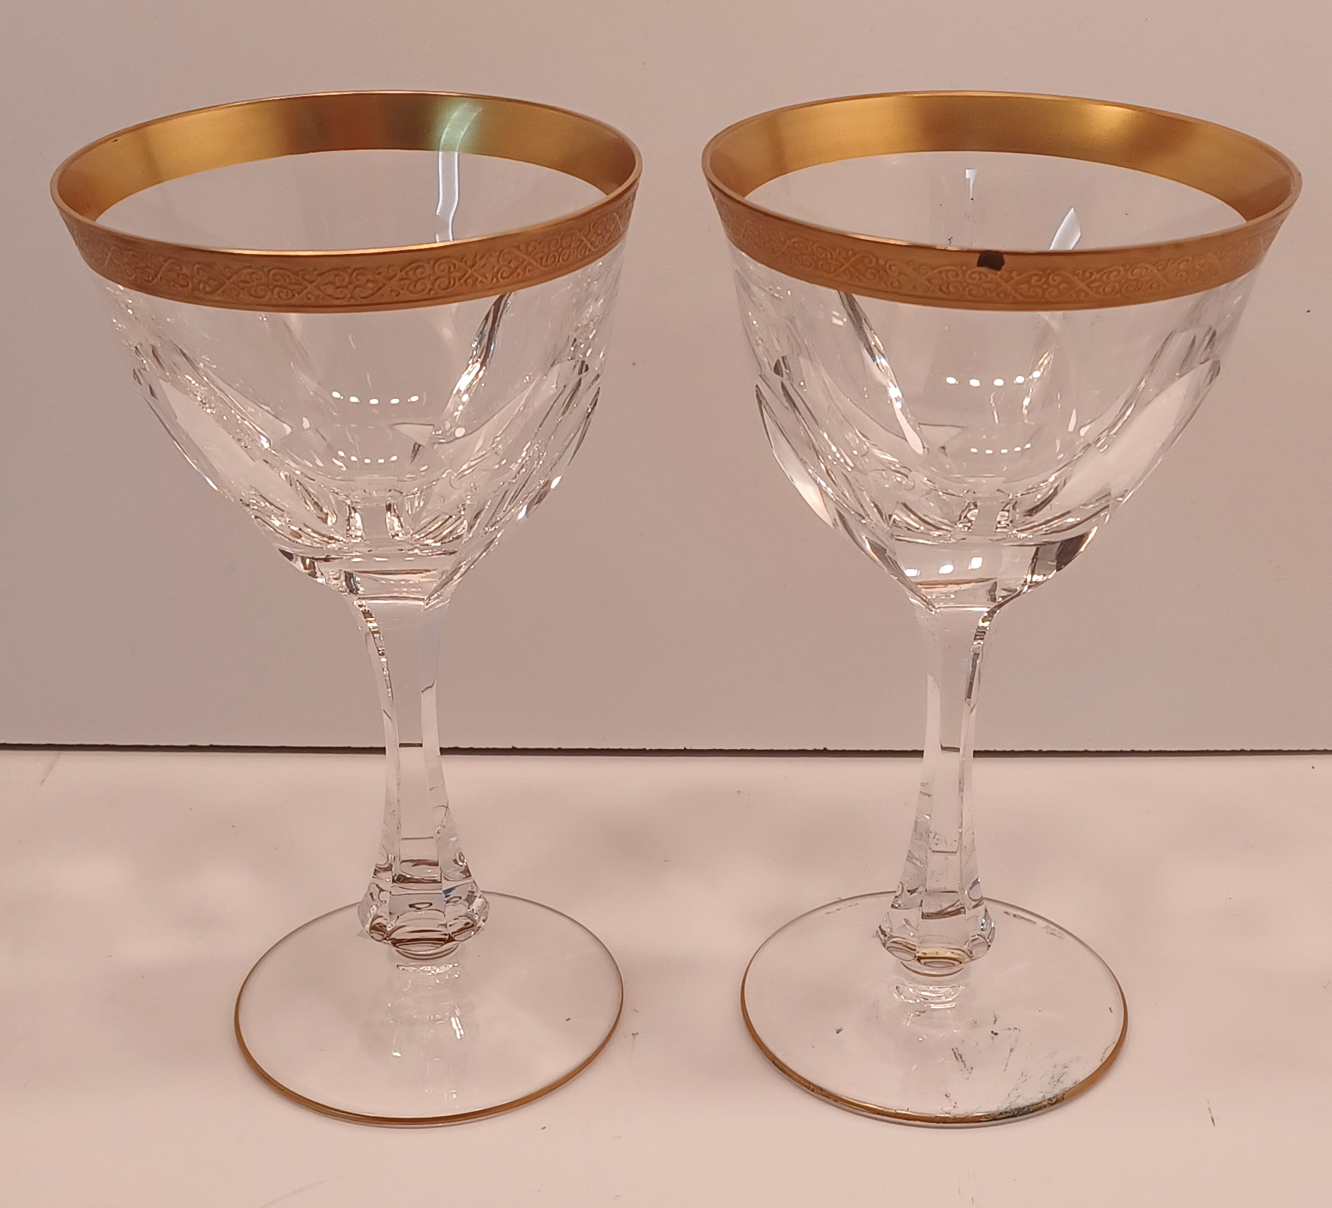 PAIR OF LADY HAMILTON PATTERN GOBLET / WINE GLASSES WITH GILT RIMS 17.5CM TALL, CANADIAN BMP VASE - Image 3 of 6